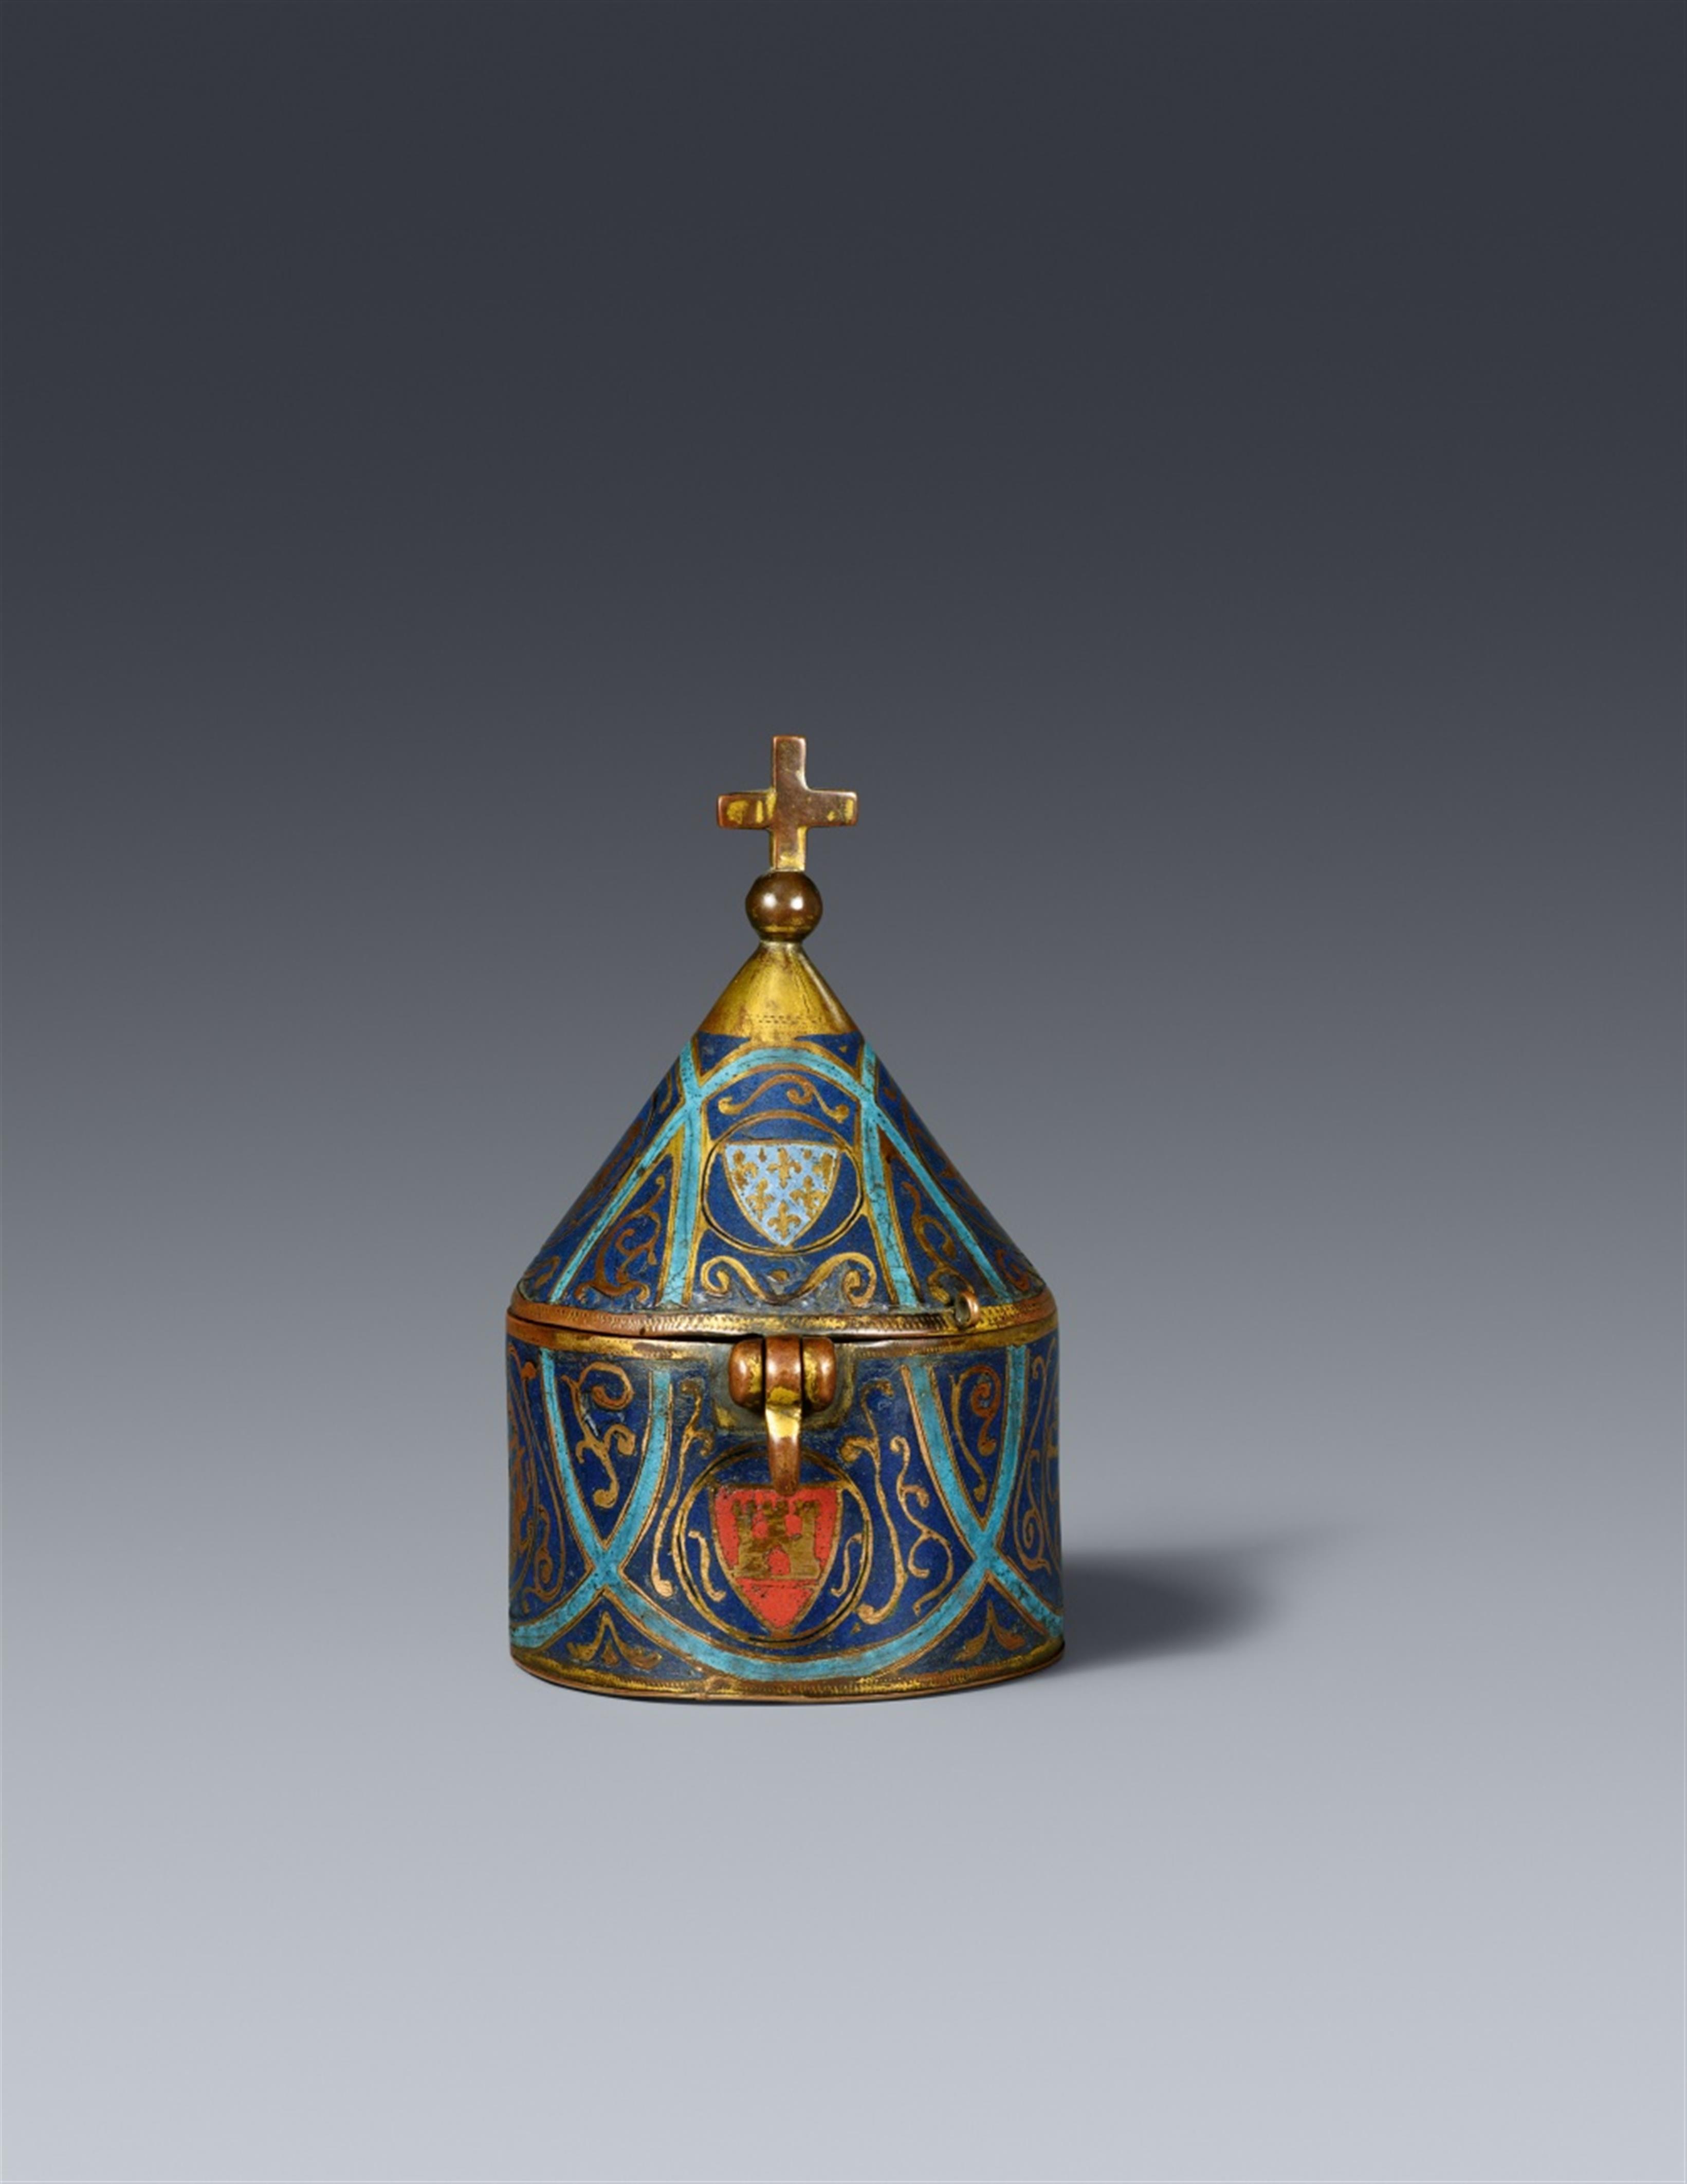 Limoges second half 13th century - A Limoges enamel pyx, second half 13th century - image-2